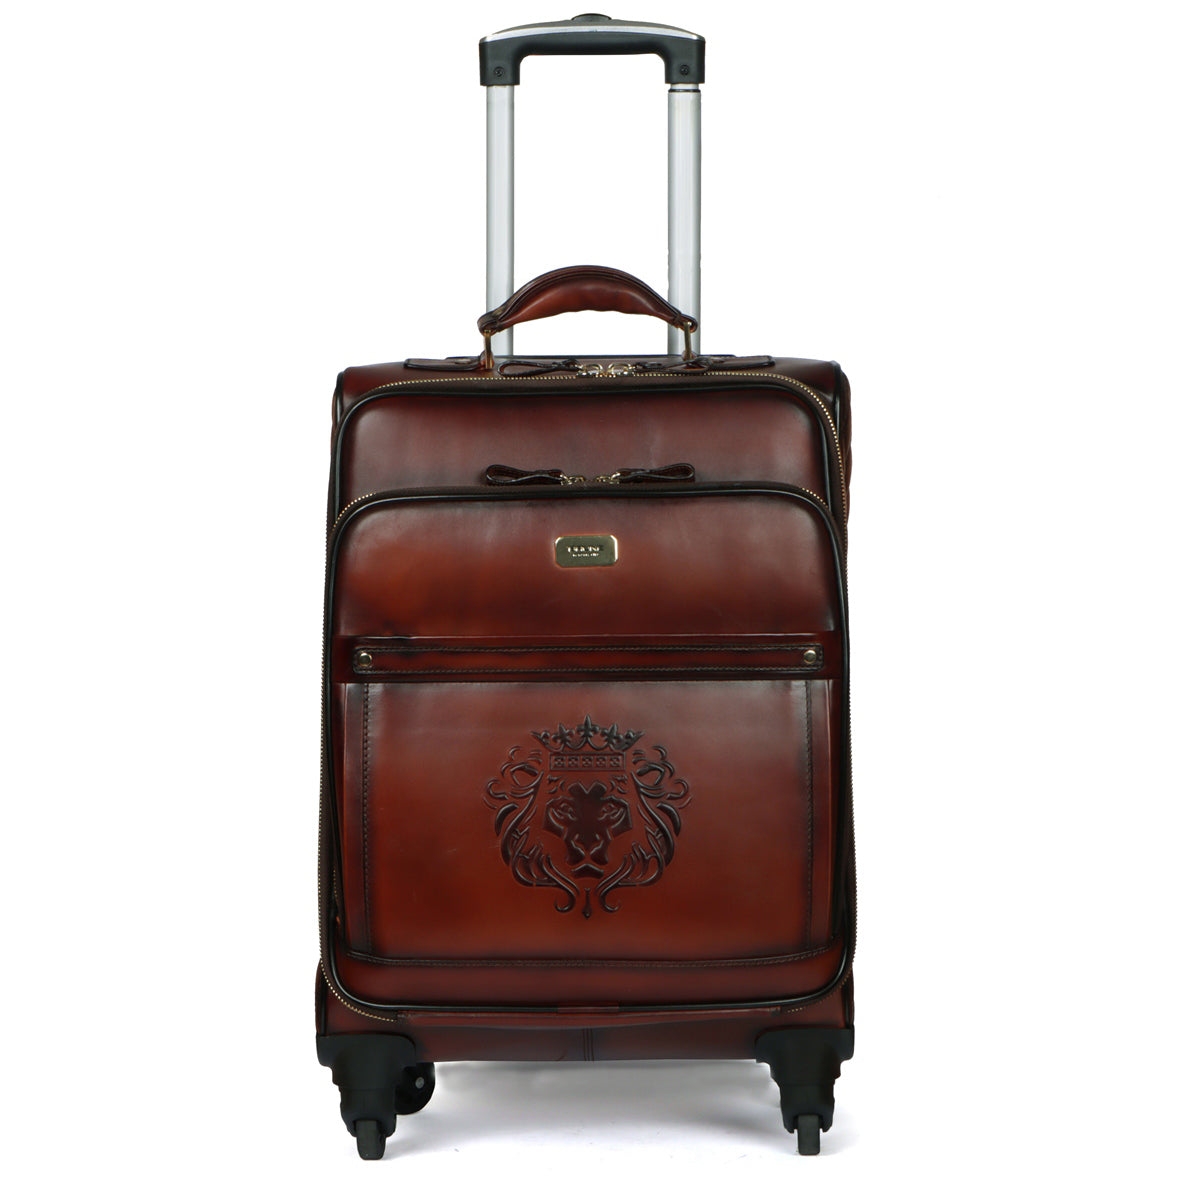 Brown Leather Diamond Stitched Design Trolley Bag